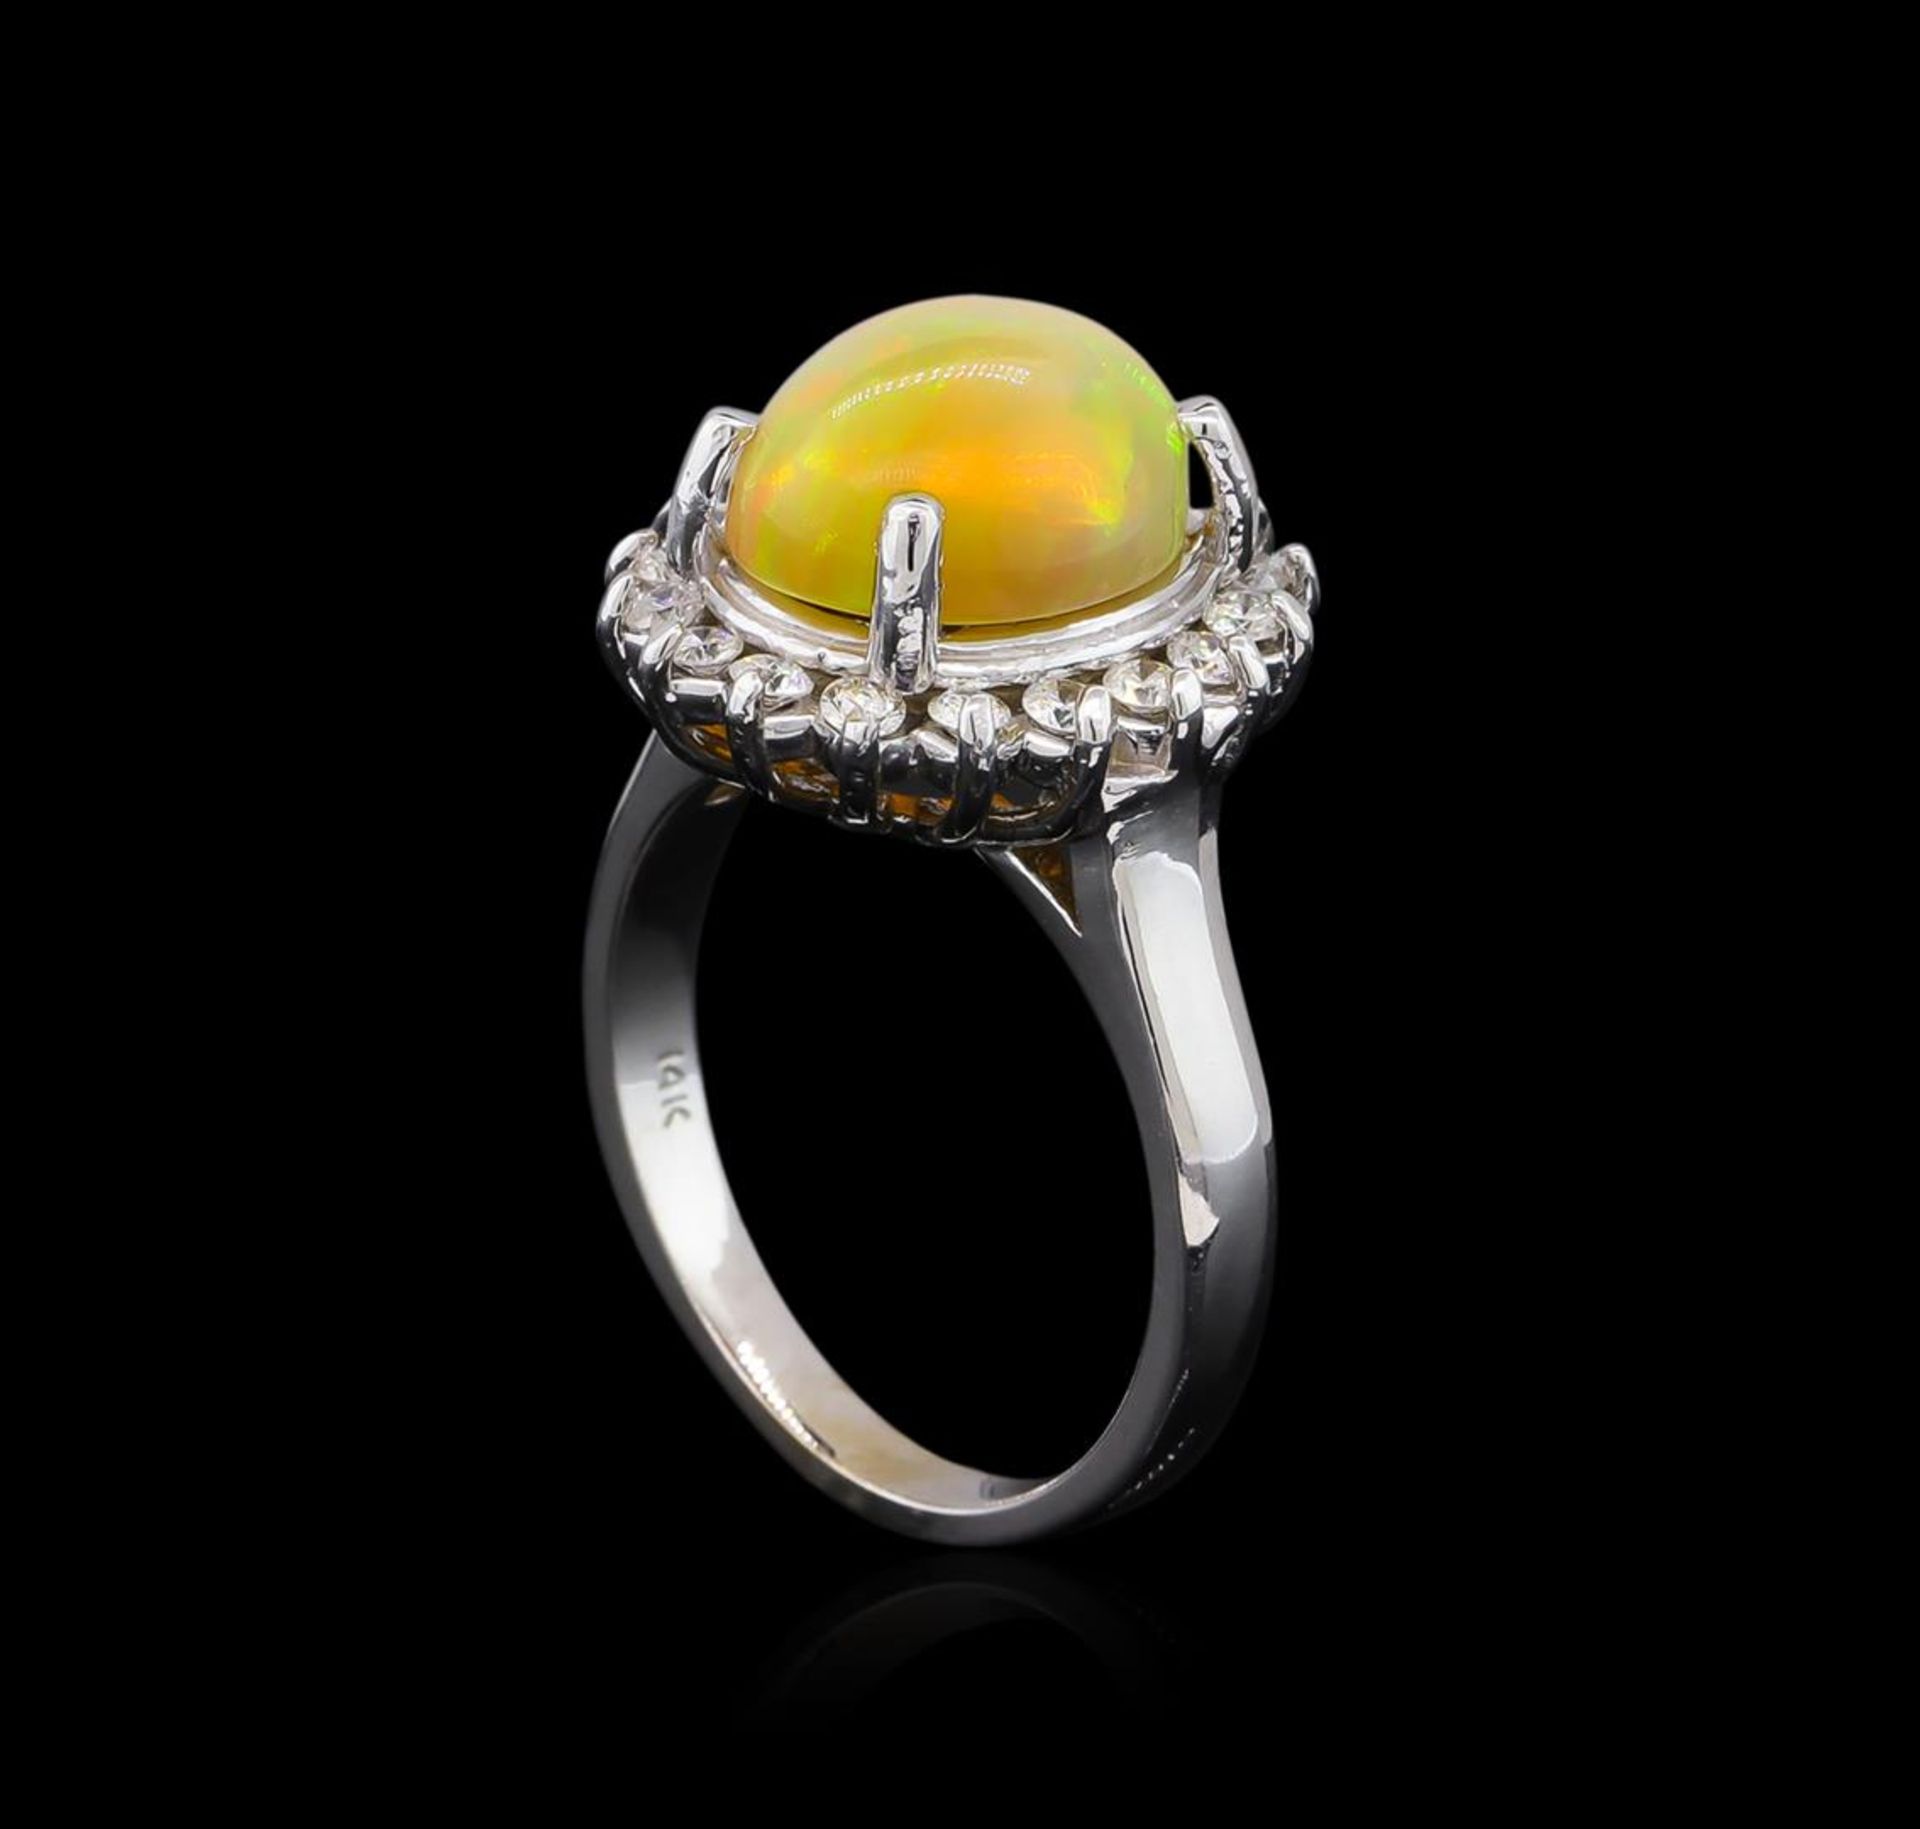 3.07 ctw Opal and Diamond Ring - 14KT White Gold - Image 4 of 4